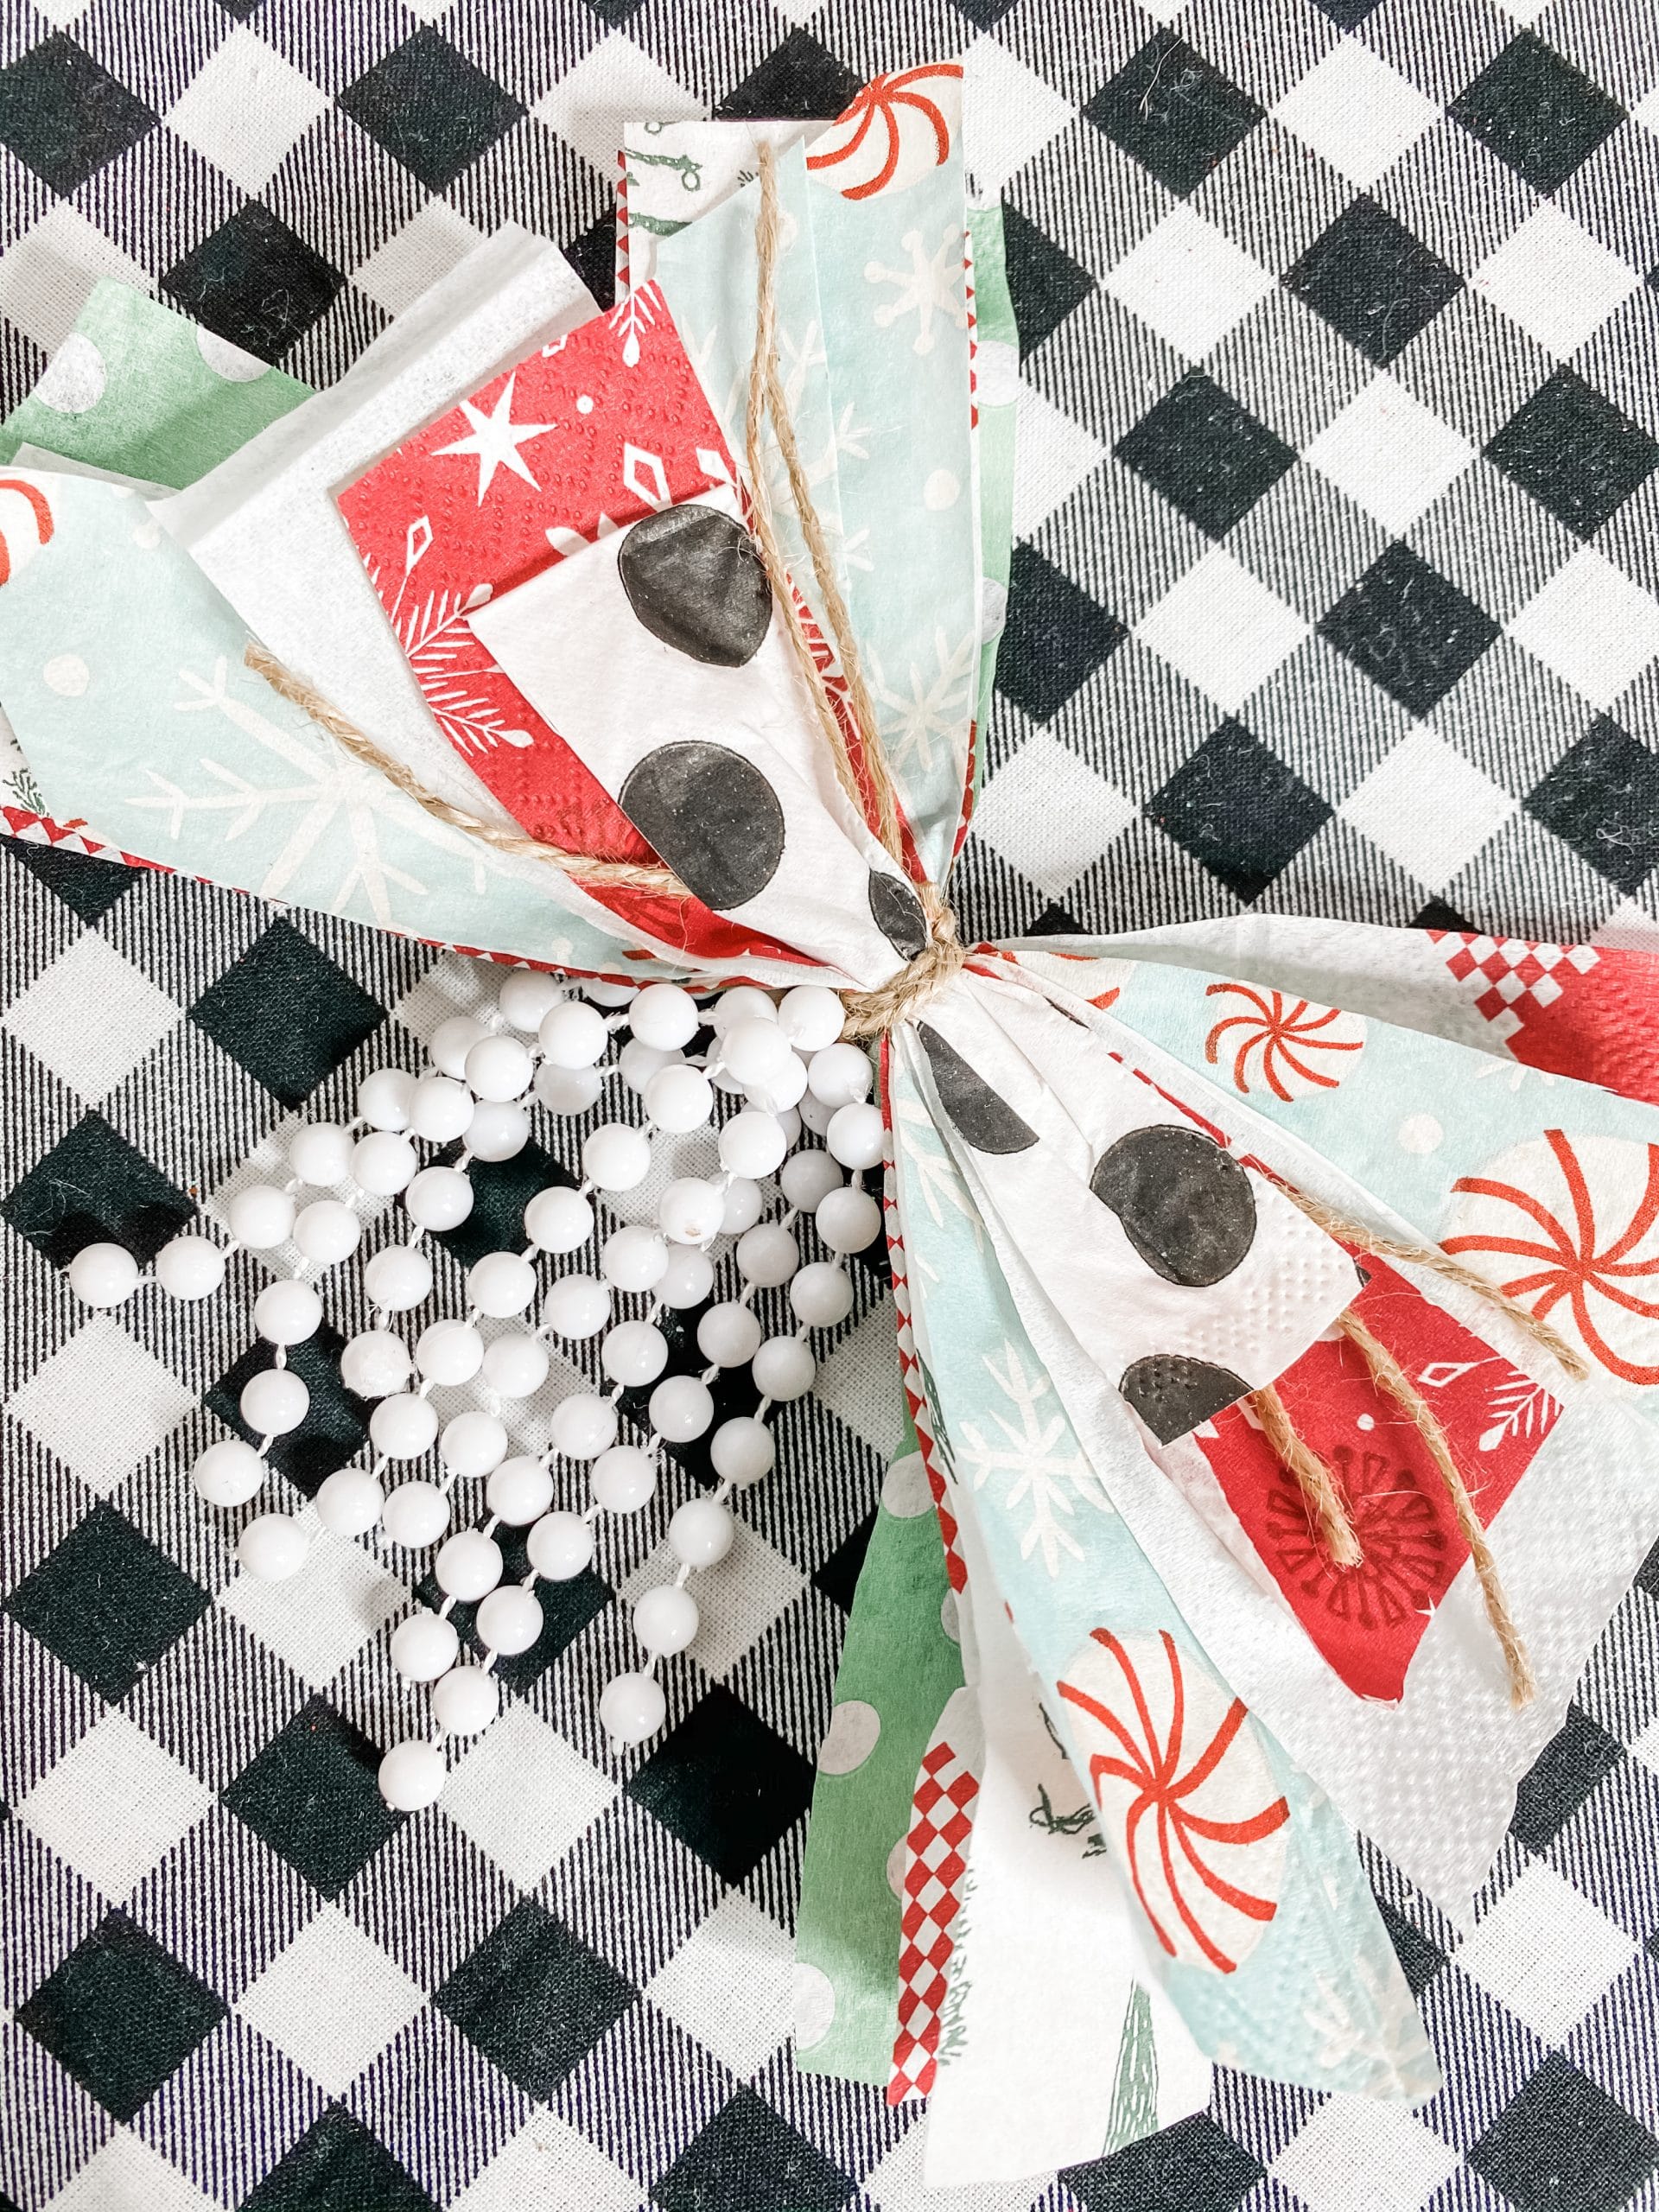 How to Make Amber’s Napkin bow with paper napkins